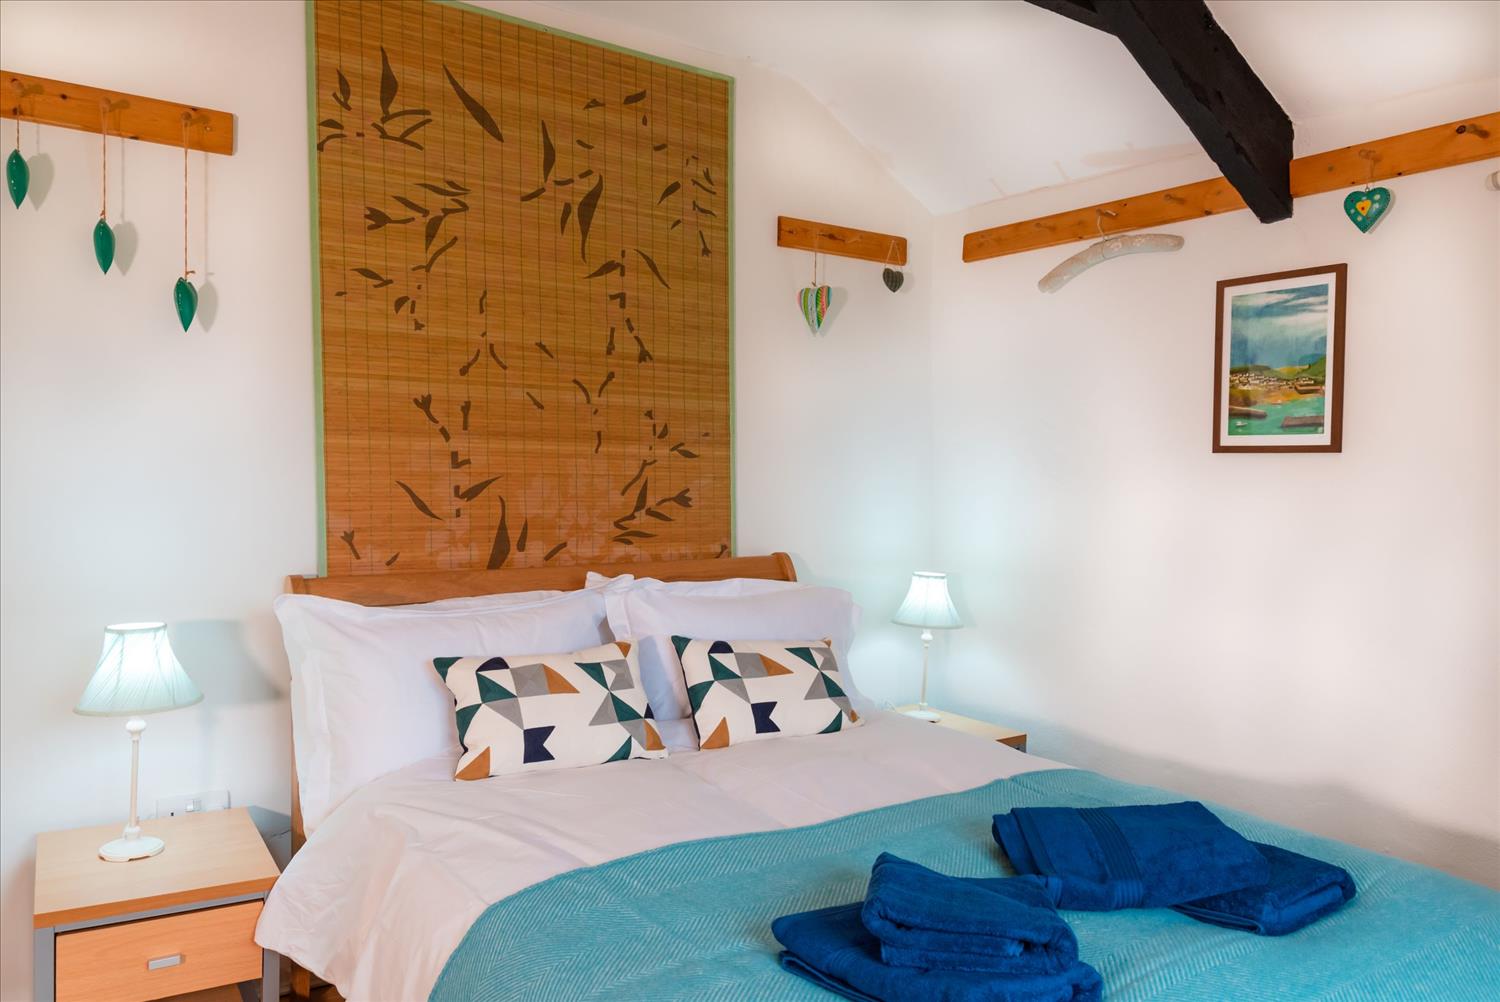 The double-bedroom at Polrunny Farm's Blackberry Cottage, with a towels placed on a blue bedspread; and a picture of Port Isaac on the wall.